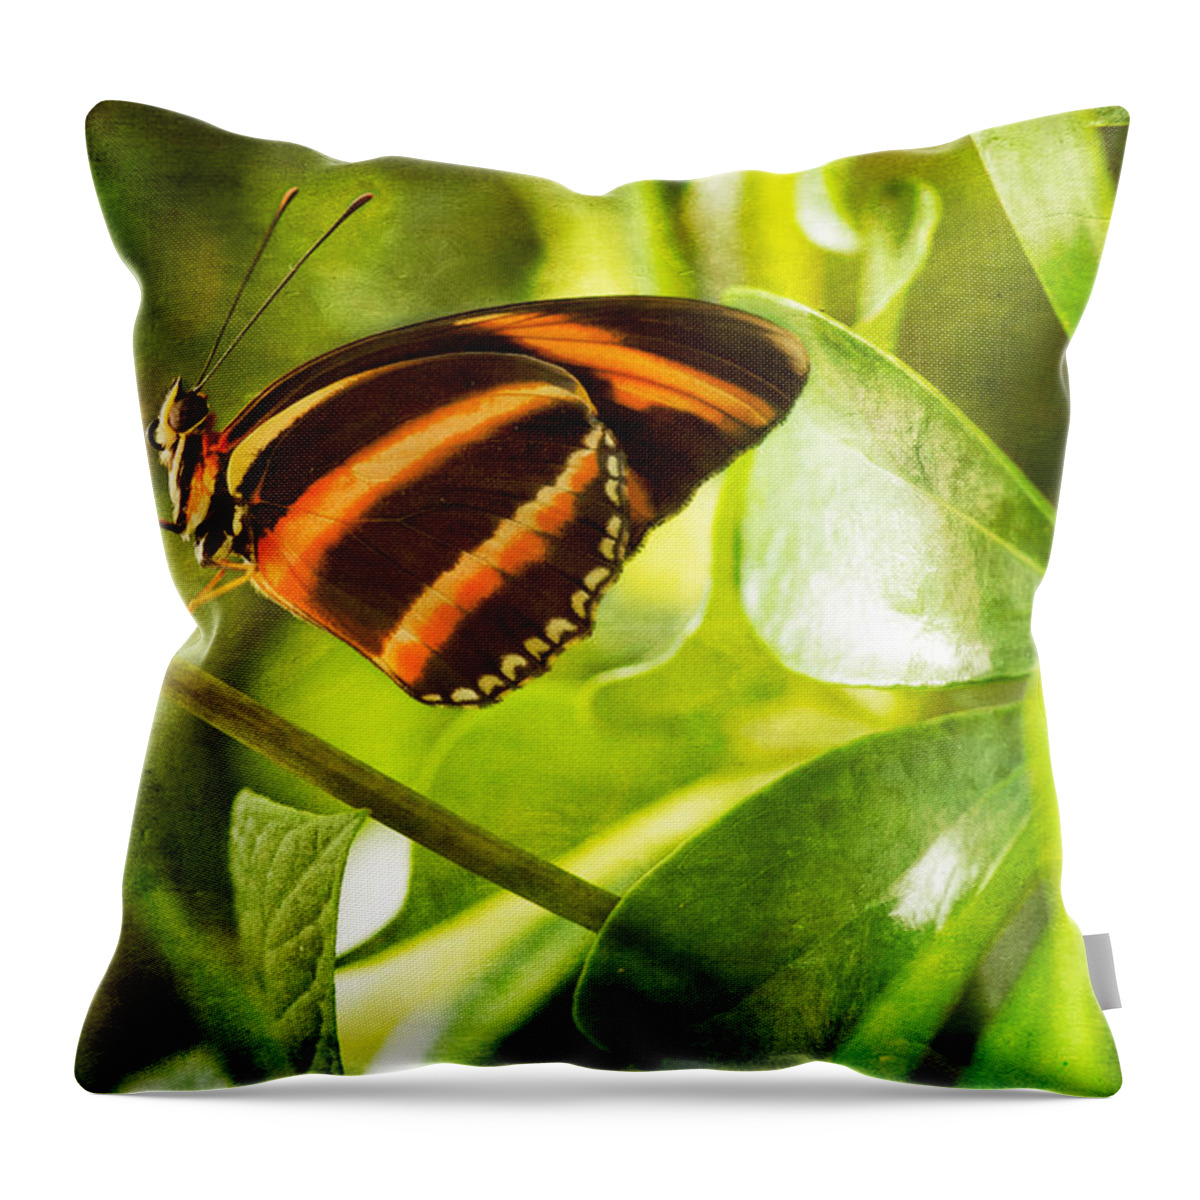 Butterfly Throw Pillow featuring the photograph Morning Sun by Elin Skov Vaeth